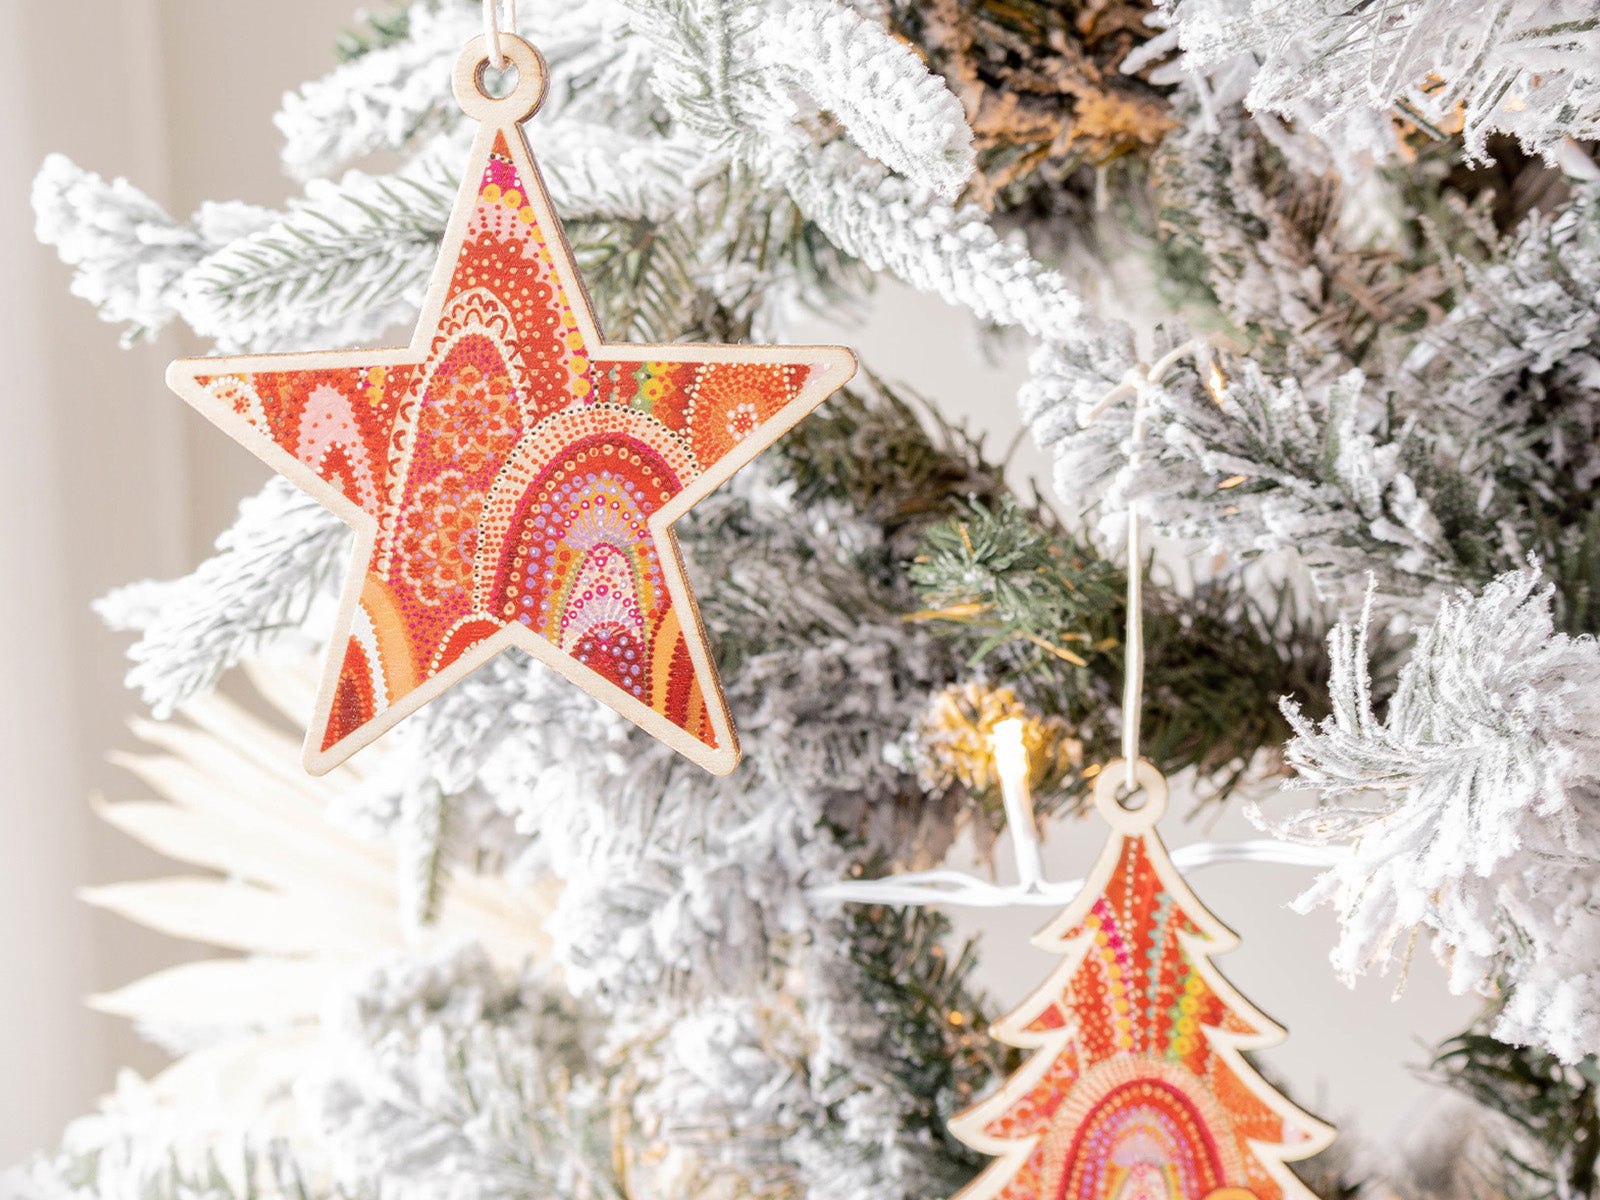 Australian Christmas ornaments with Aboriginal Art from Koh Living